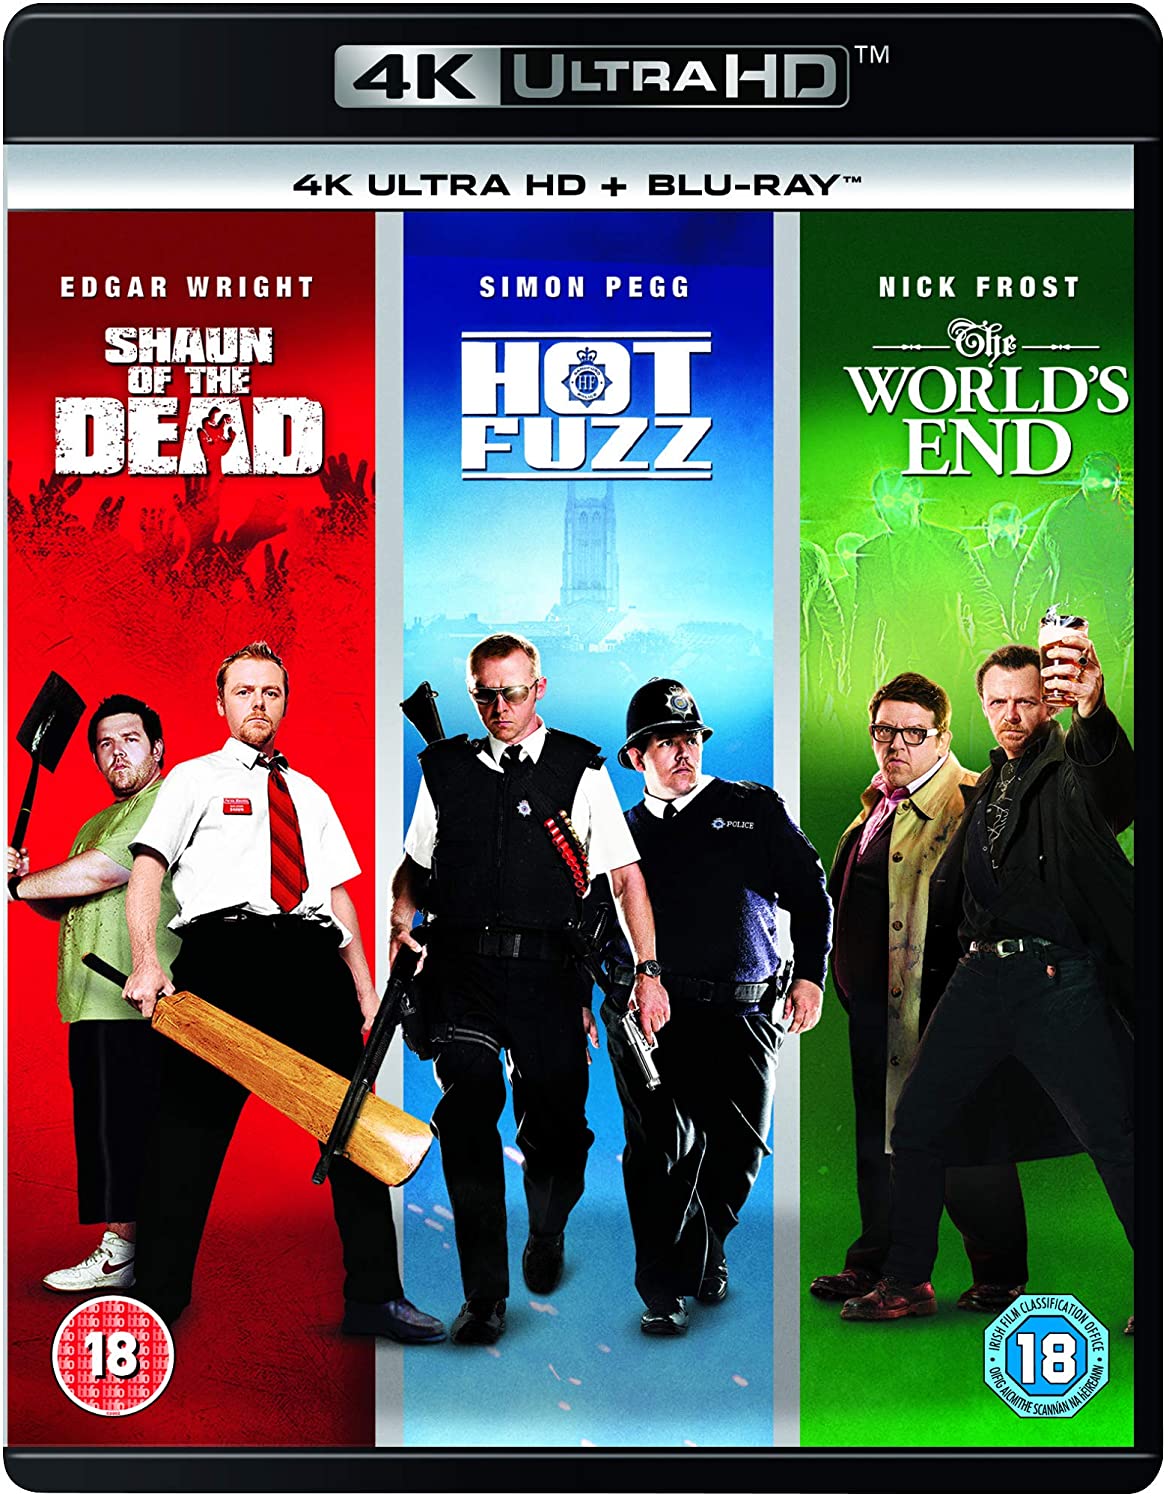 Shaun of the Dead/Hot Fuzz/The World's End Trilogy (4K Ultra HD + Blu-ray)